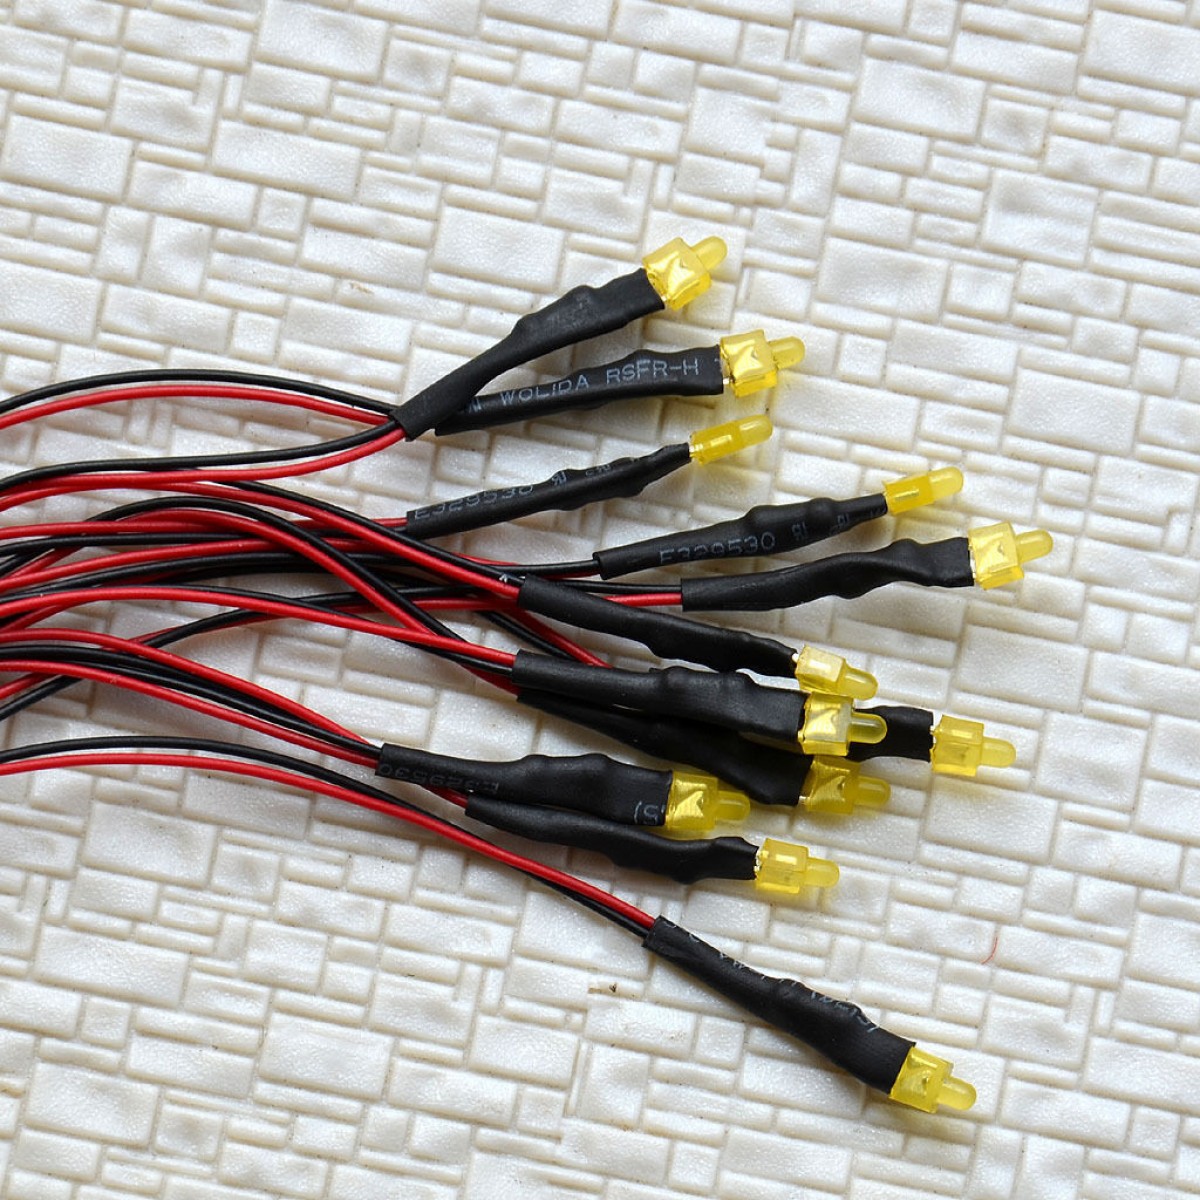 10 x Pre-Wired 2mm Yellow LEDs prewired resistor for 12V - 18V DC use